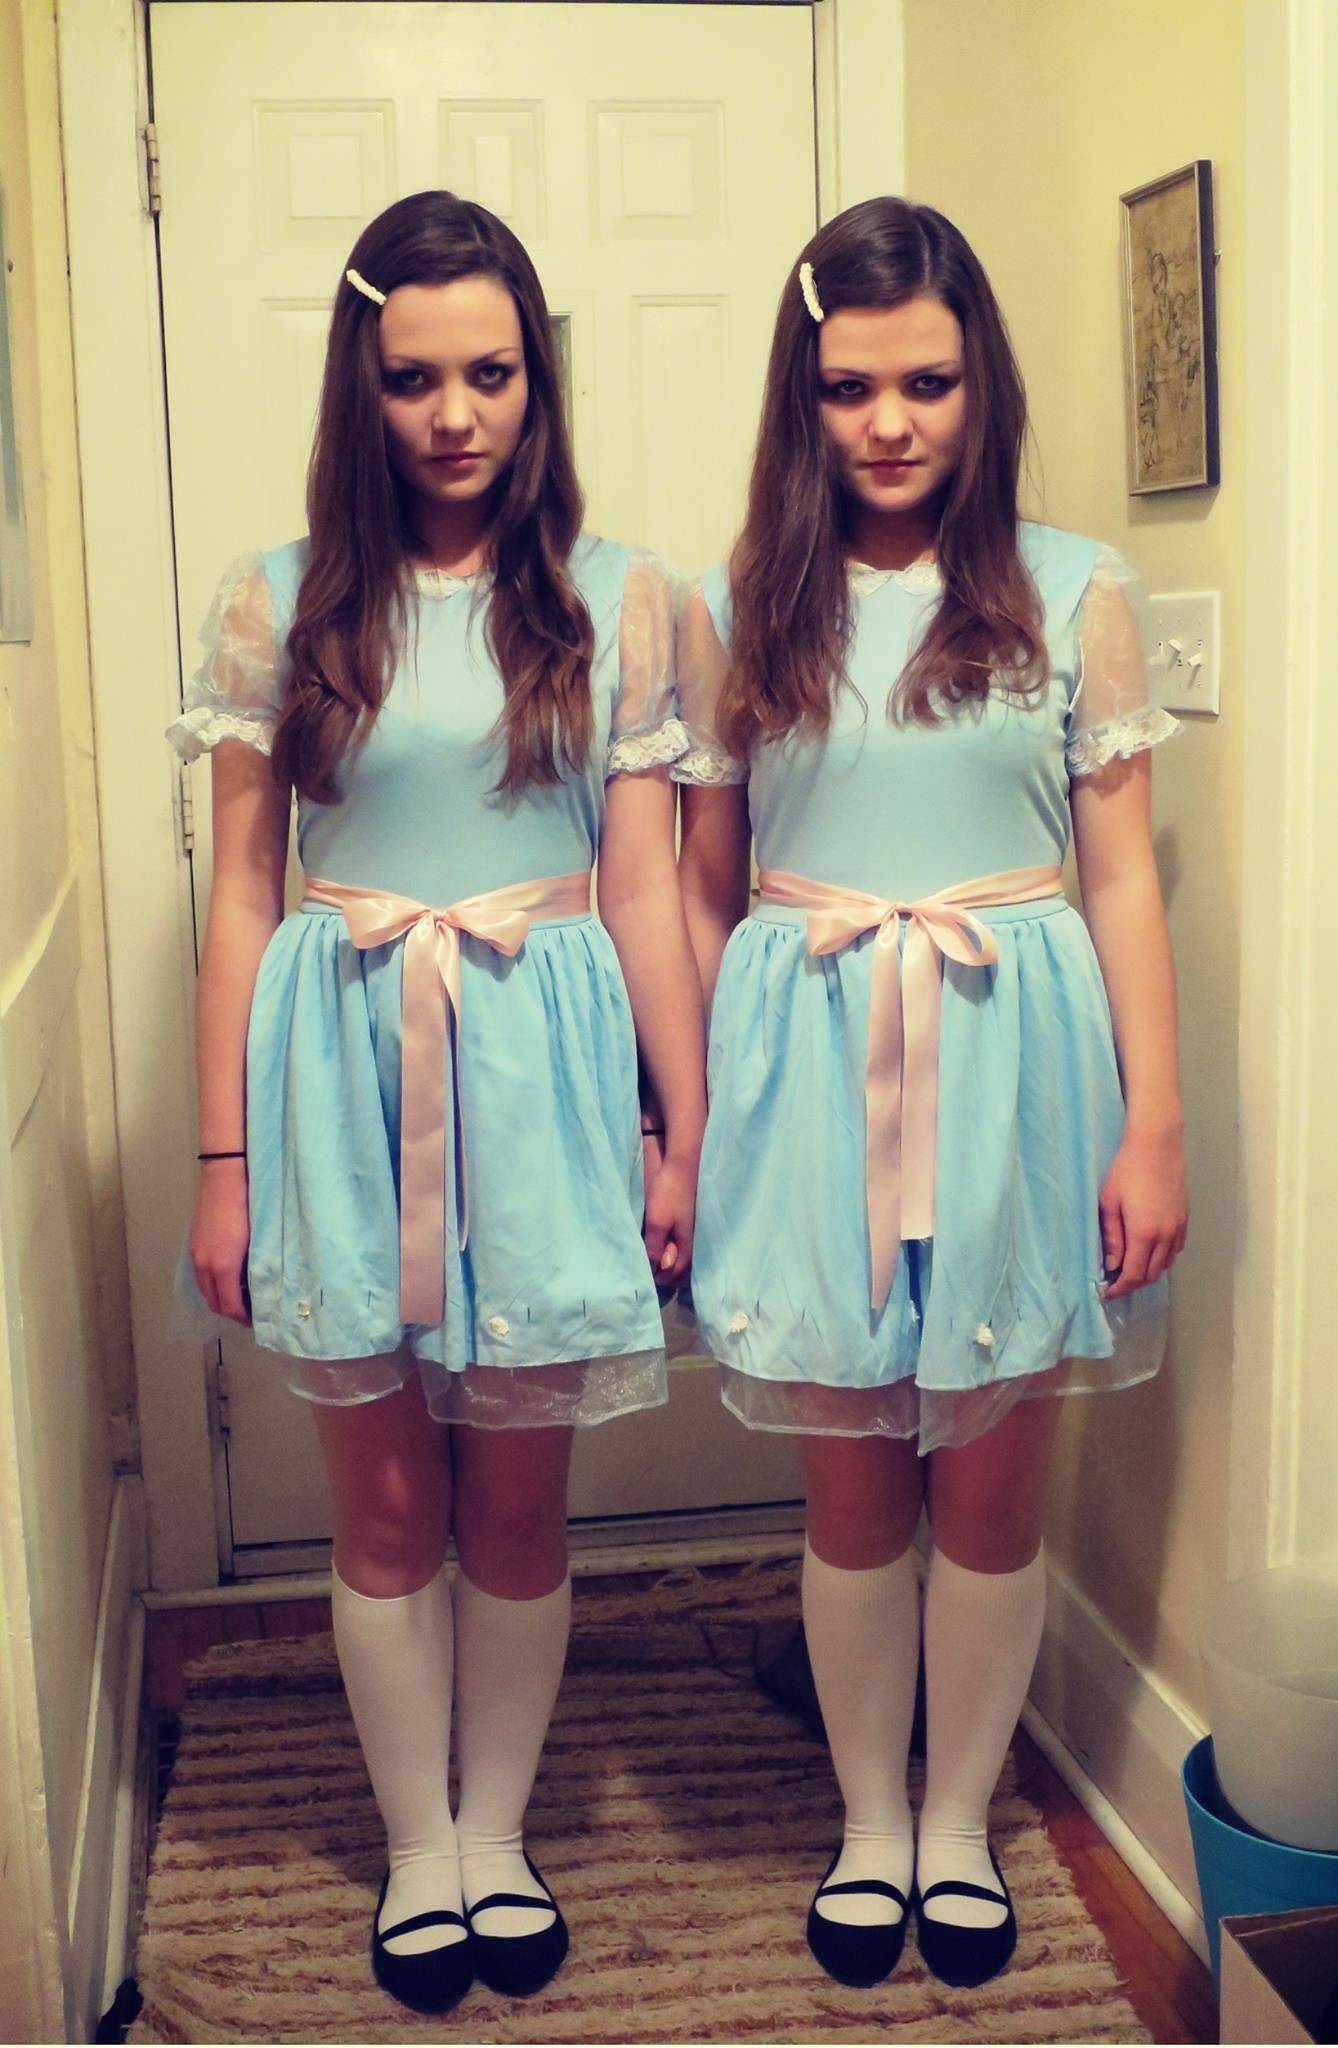 The Grady twins from The Shining